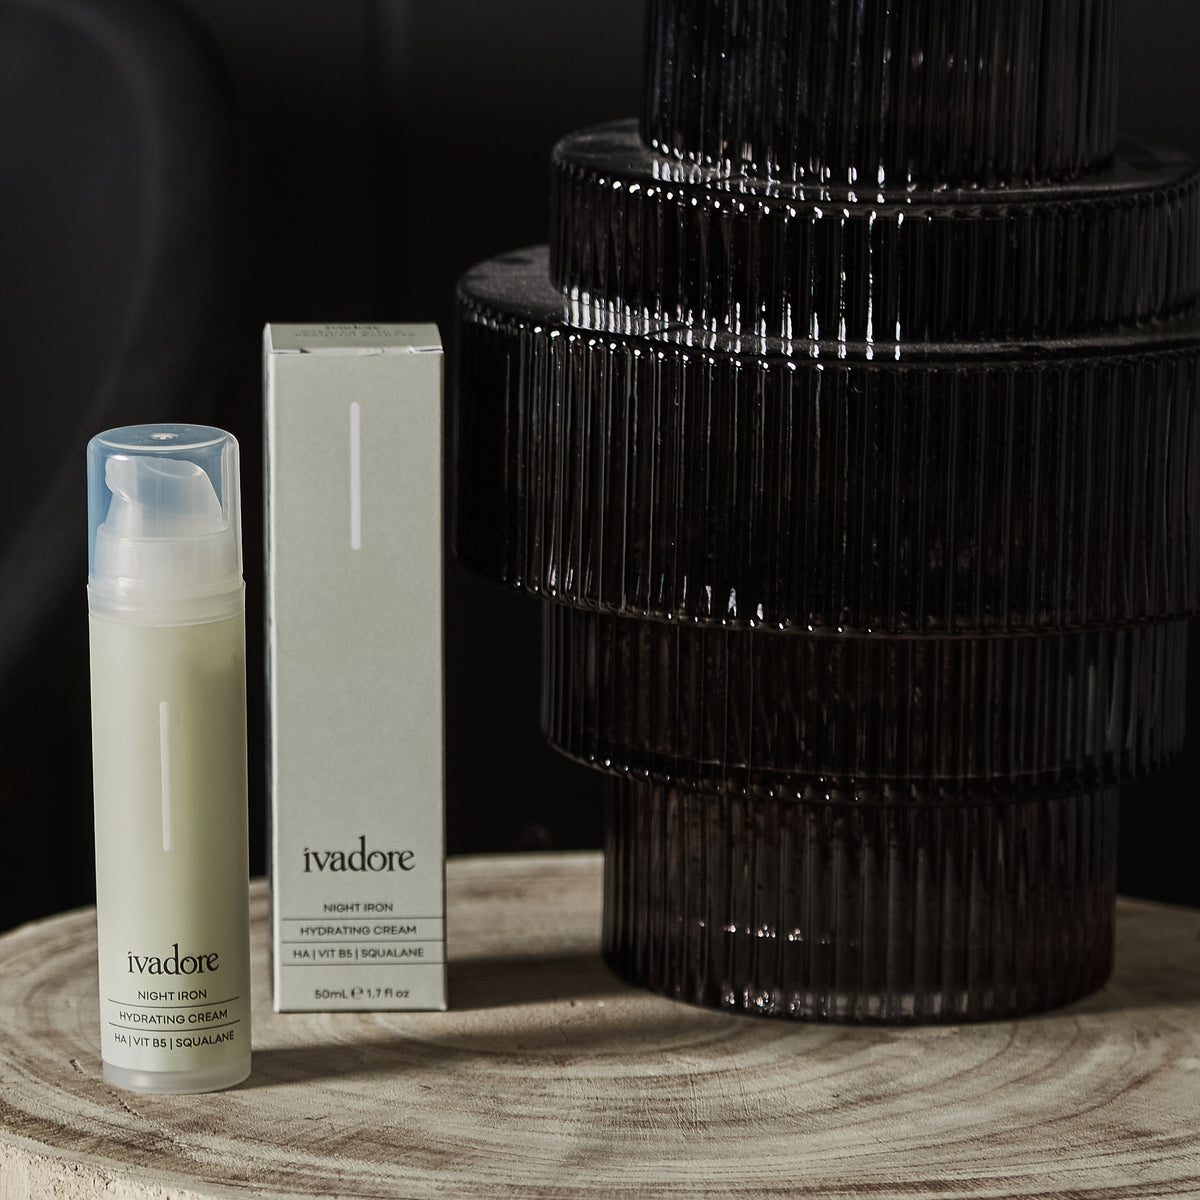 Night Iron Hydrating Cream in packaging on wooden table with grey glass vase